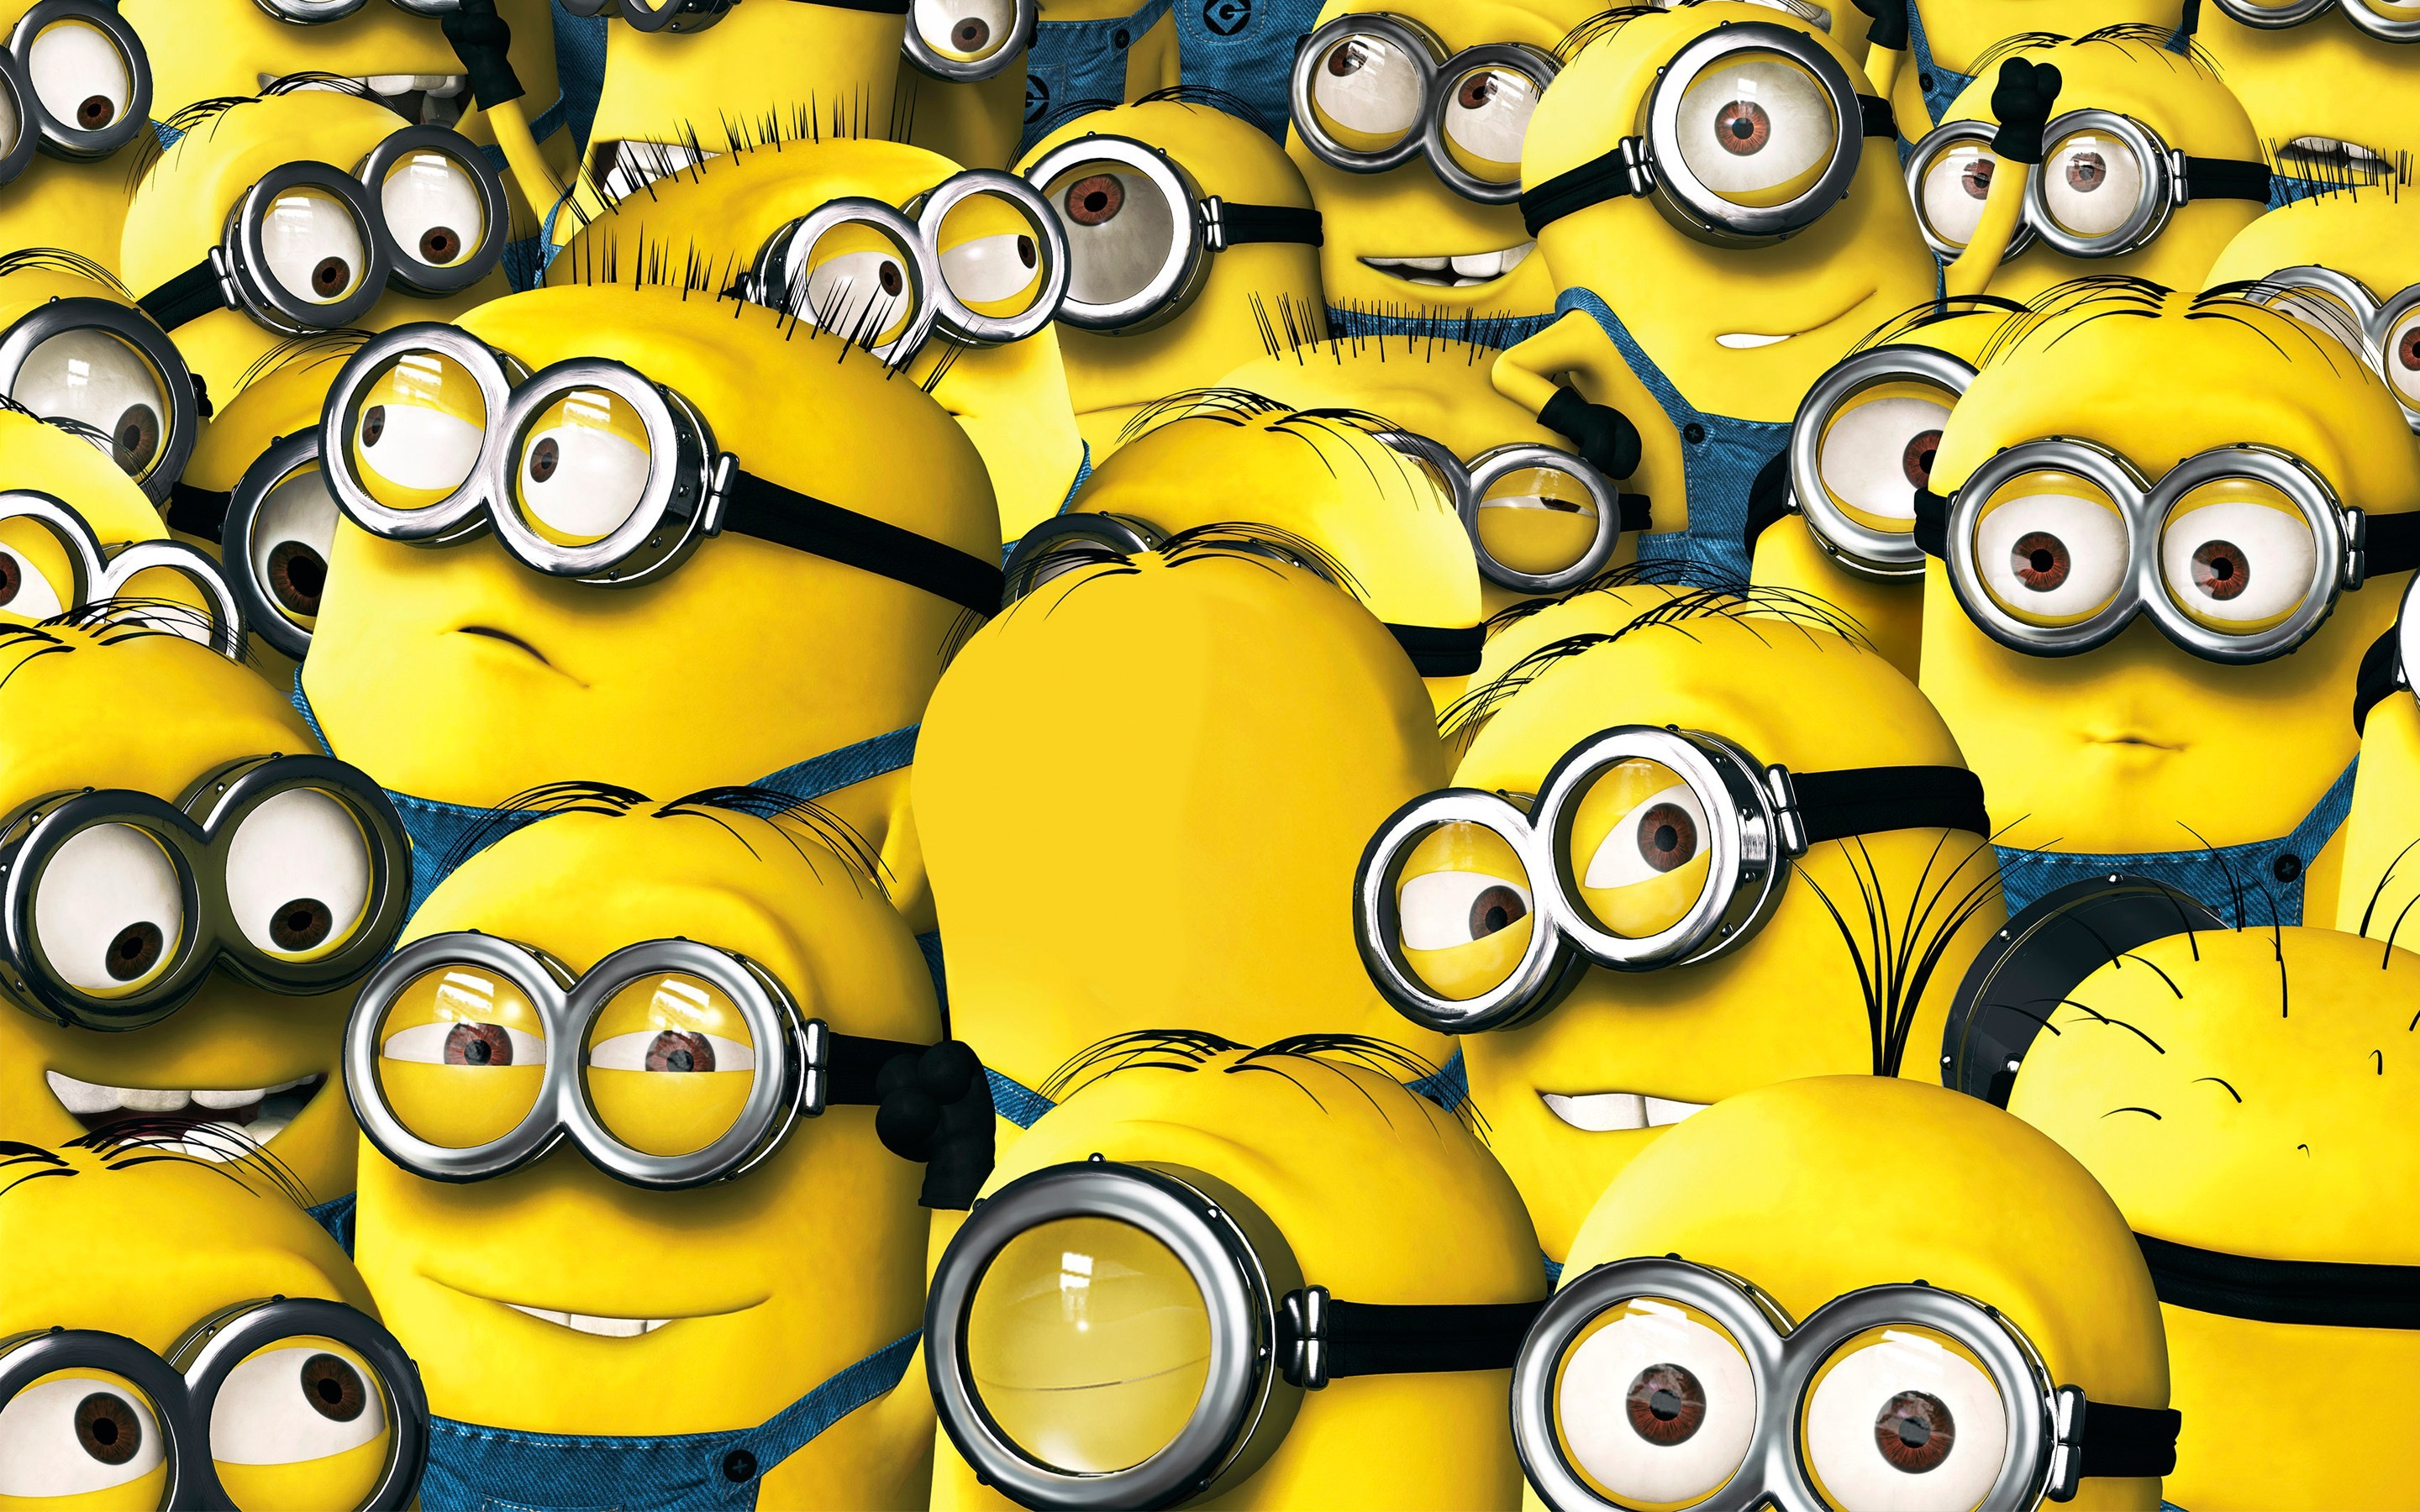 2880x1800 Despicable me wallpapers with quotes minion wallpaper wallpapersafari jpg   Wallpaper super funny minion quotes